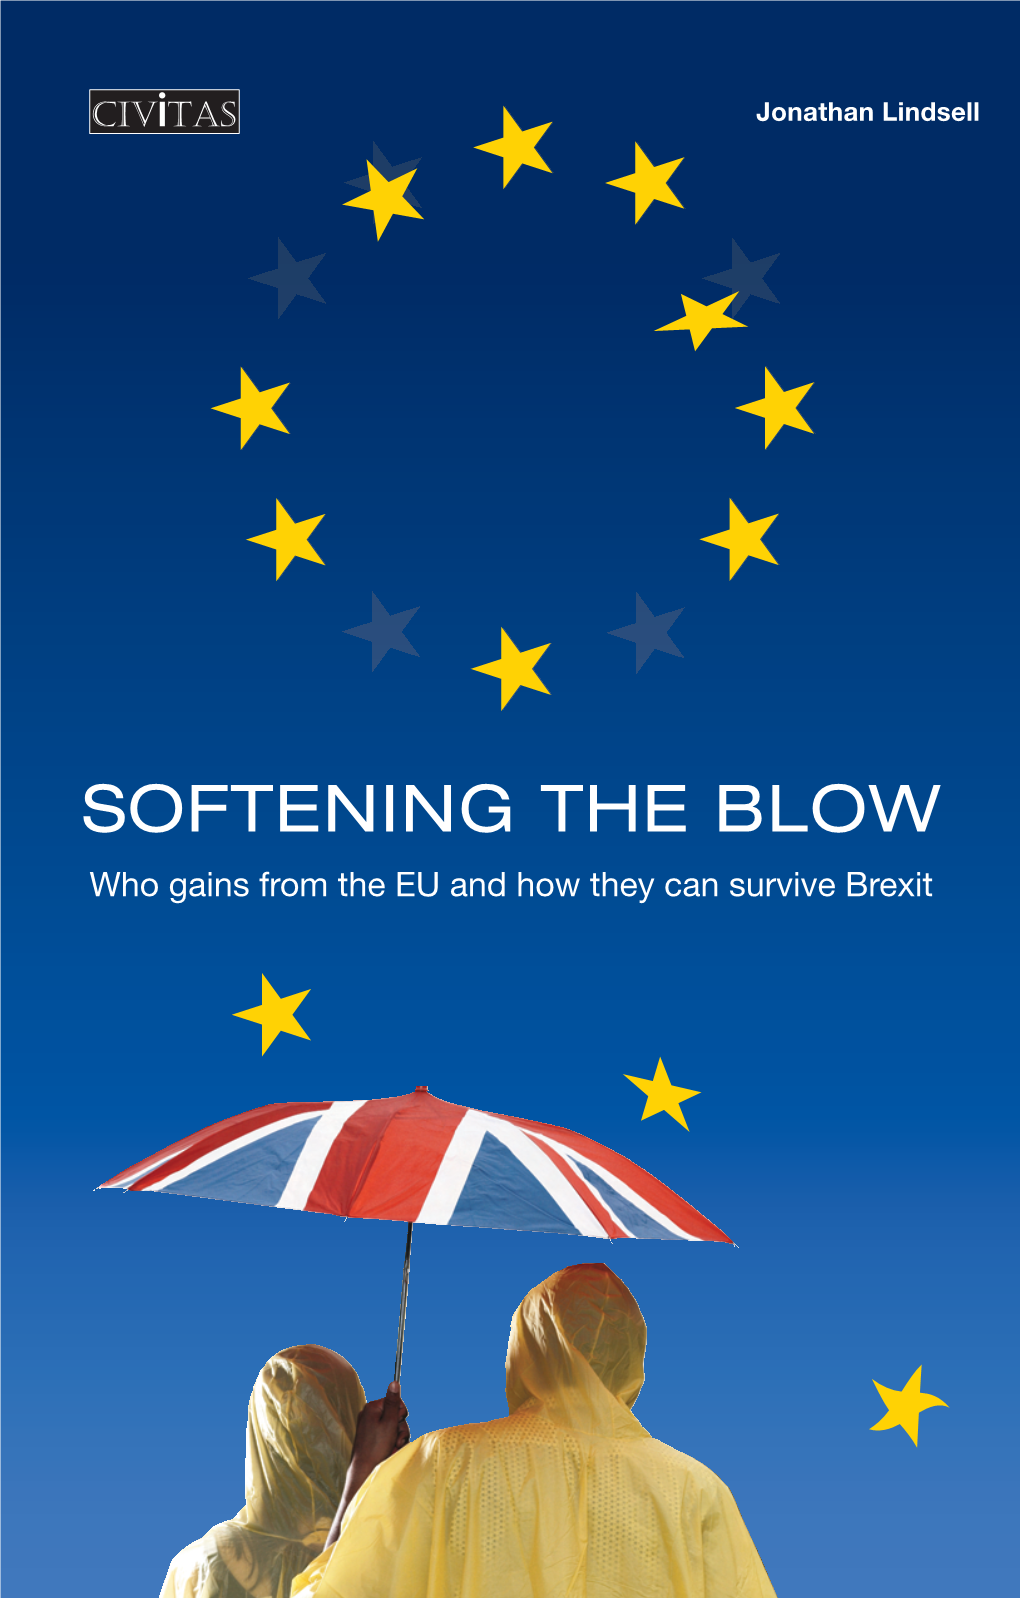 Softening the Blow, Jonathan Lindsell Discusses Brexit Fears with Industry Spokespeople, Then Explores How These Could Be Addressed Post-Independence